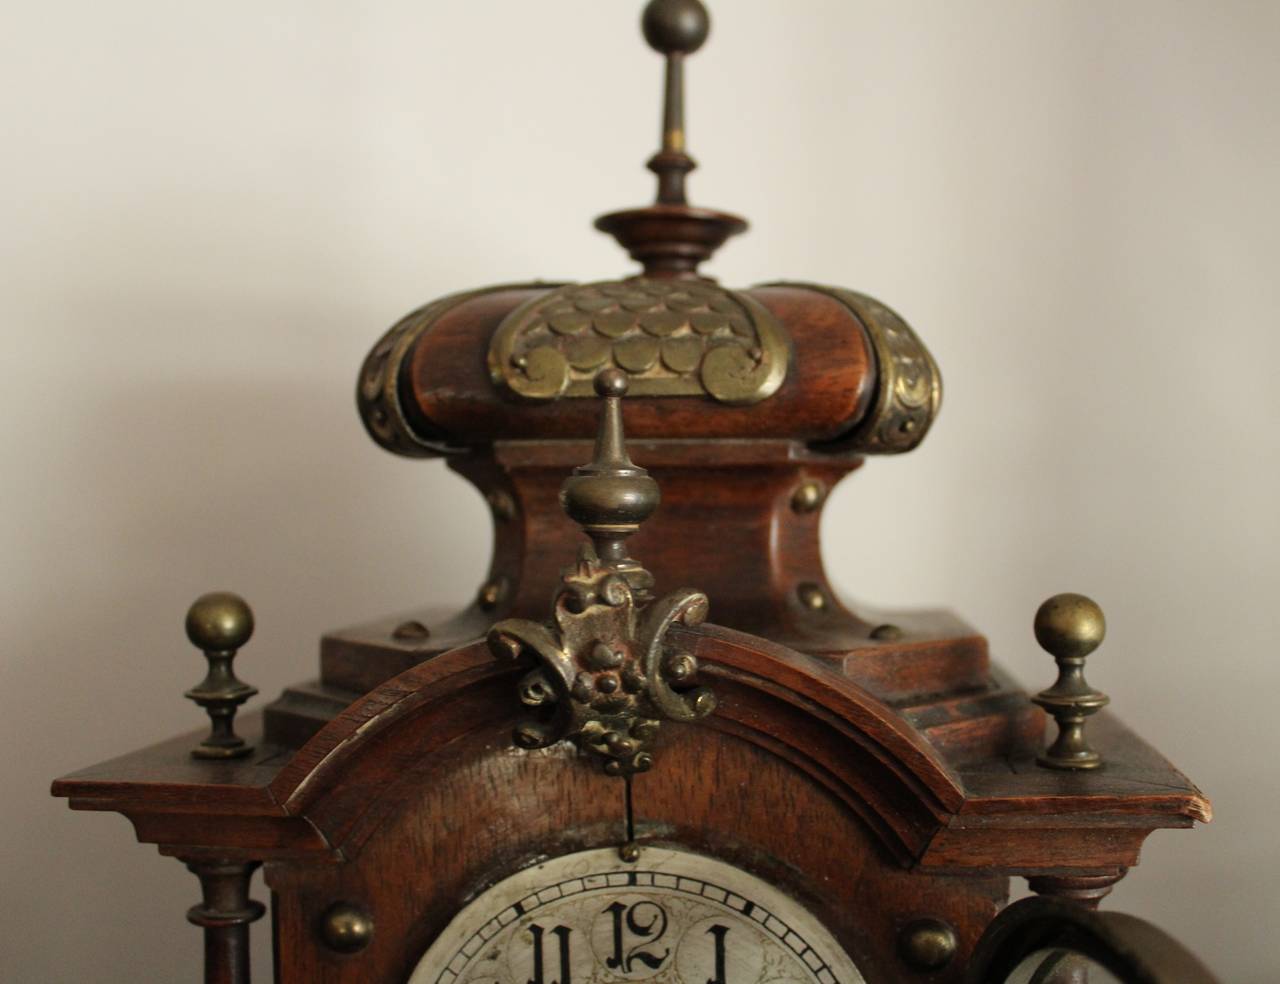 19th century German Lenzkirch mantel clock.

Highly ornate and detailed Lenzkirch mantle clock.